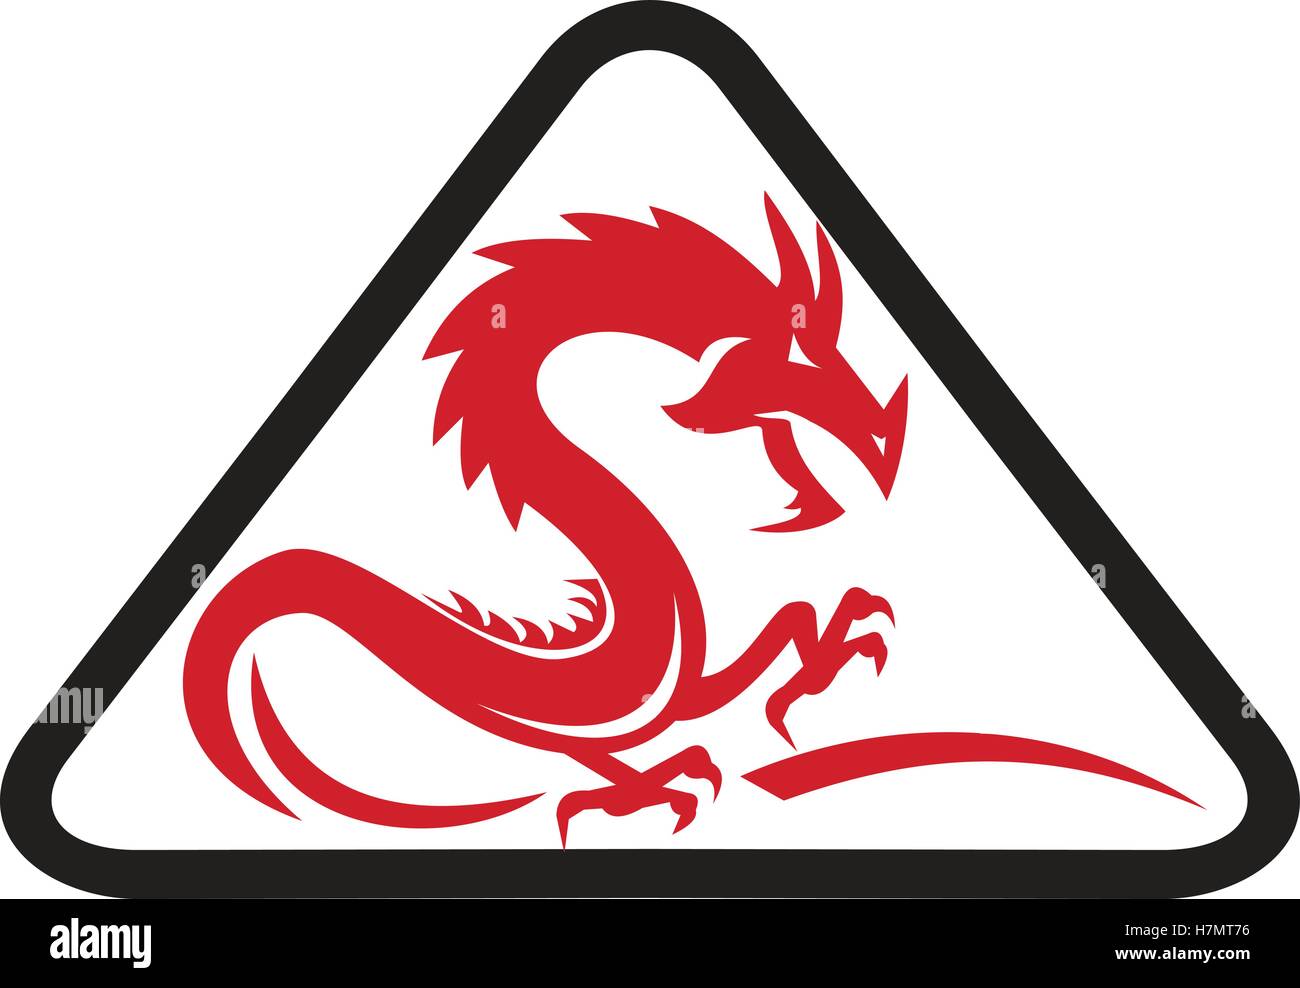 Illustration of a silhouette of a red dragon viewed from the side set inside triangle shape on isolated background done in retro style. Stock Vector